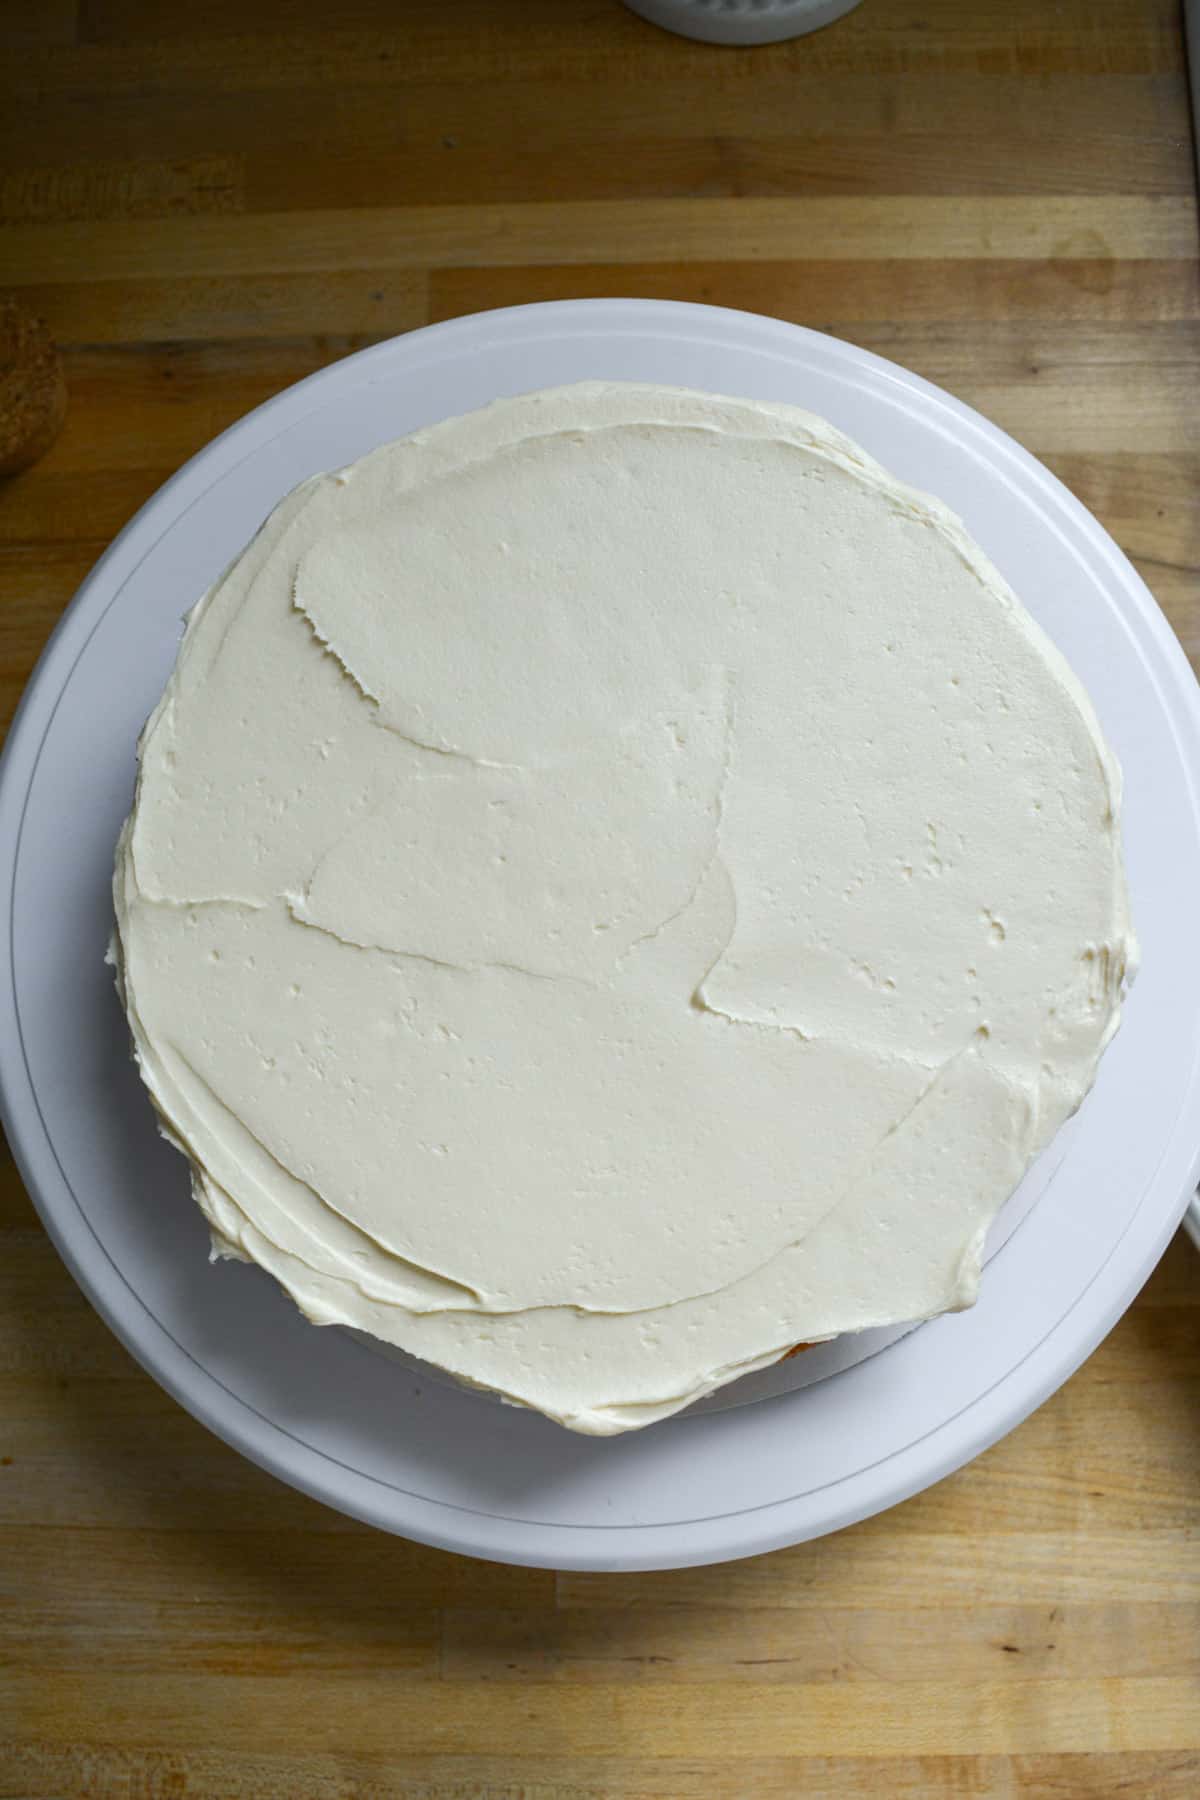 Vegan coconut cake layer on a cake board with frosting spread on it.